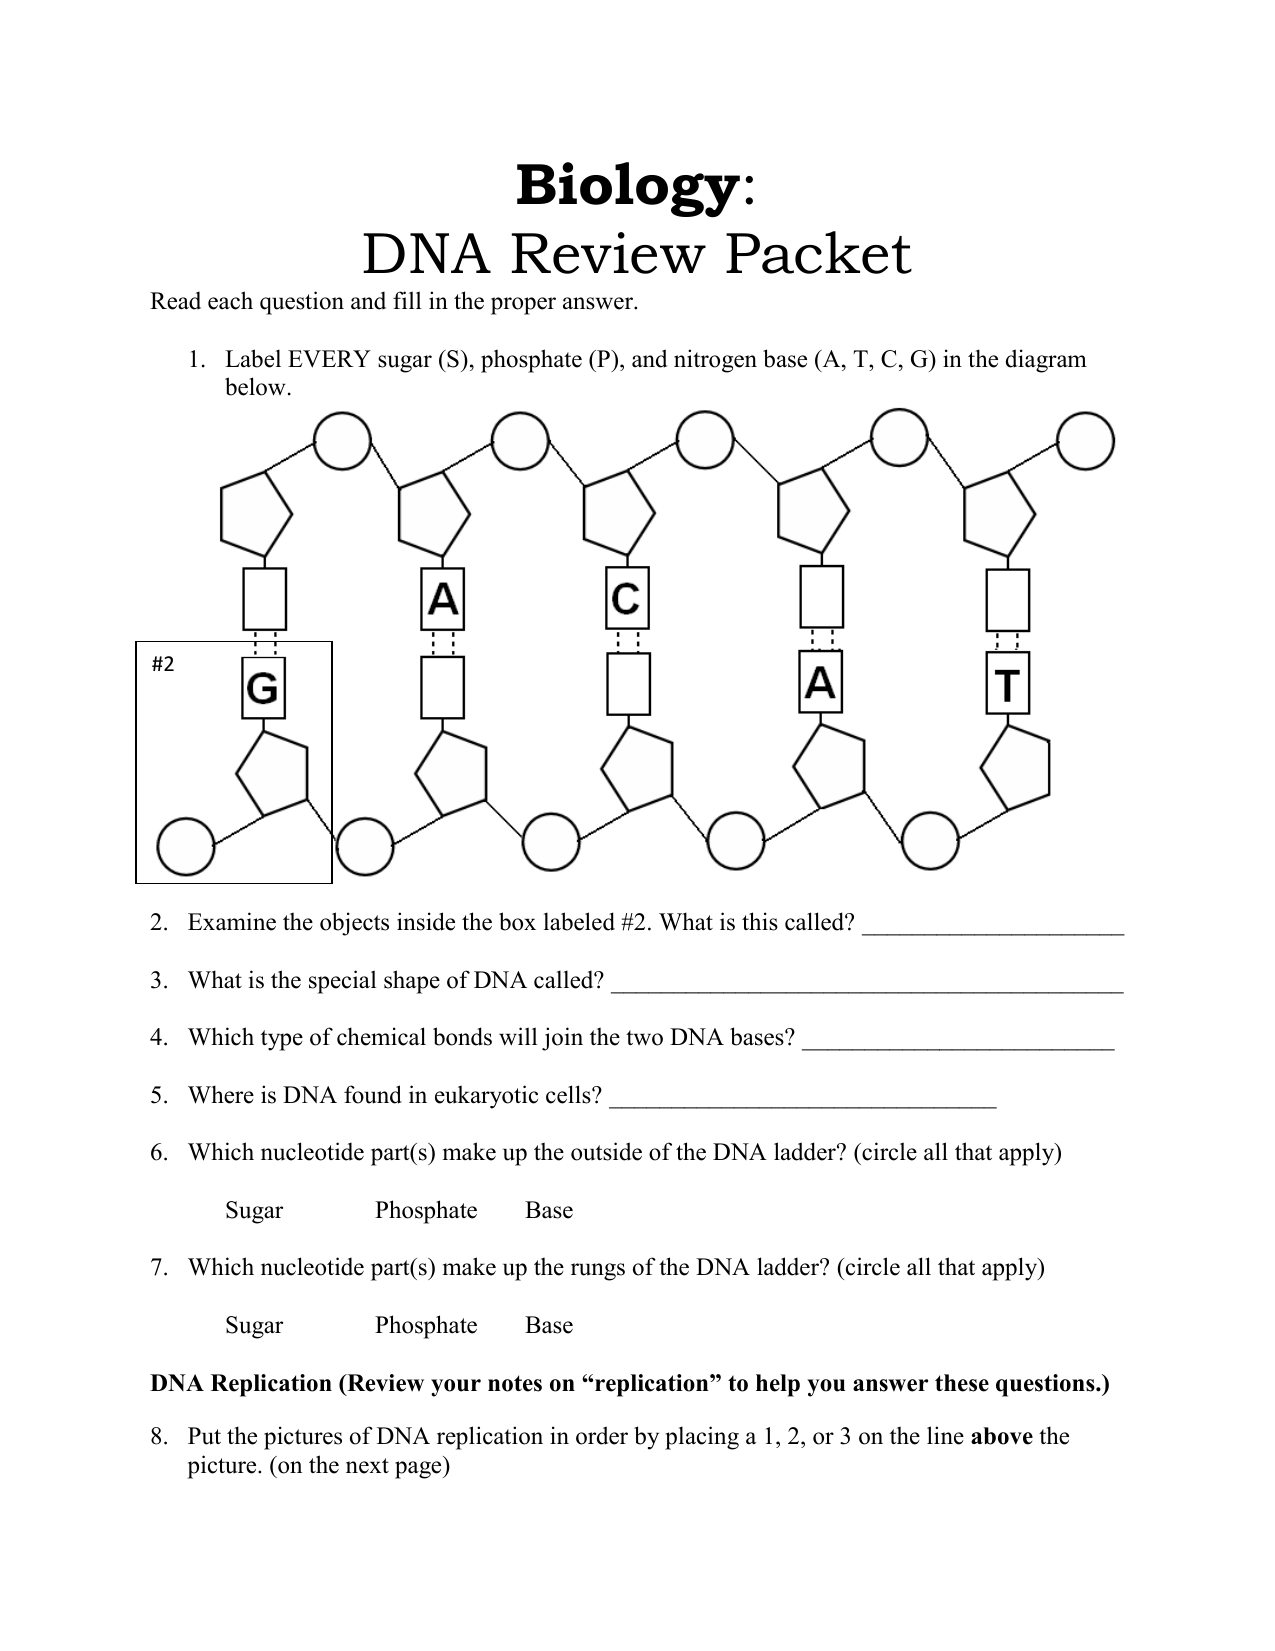 dna-replication-worksheet-answer-key-quizlet-loudlyeccentric-34-dna